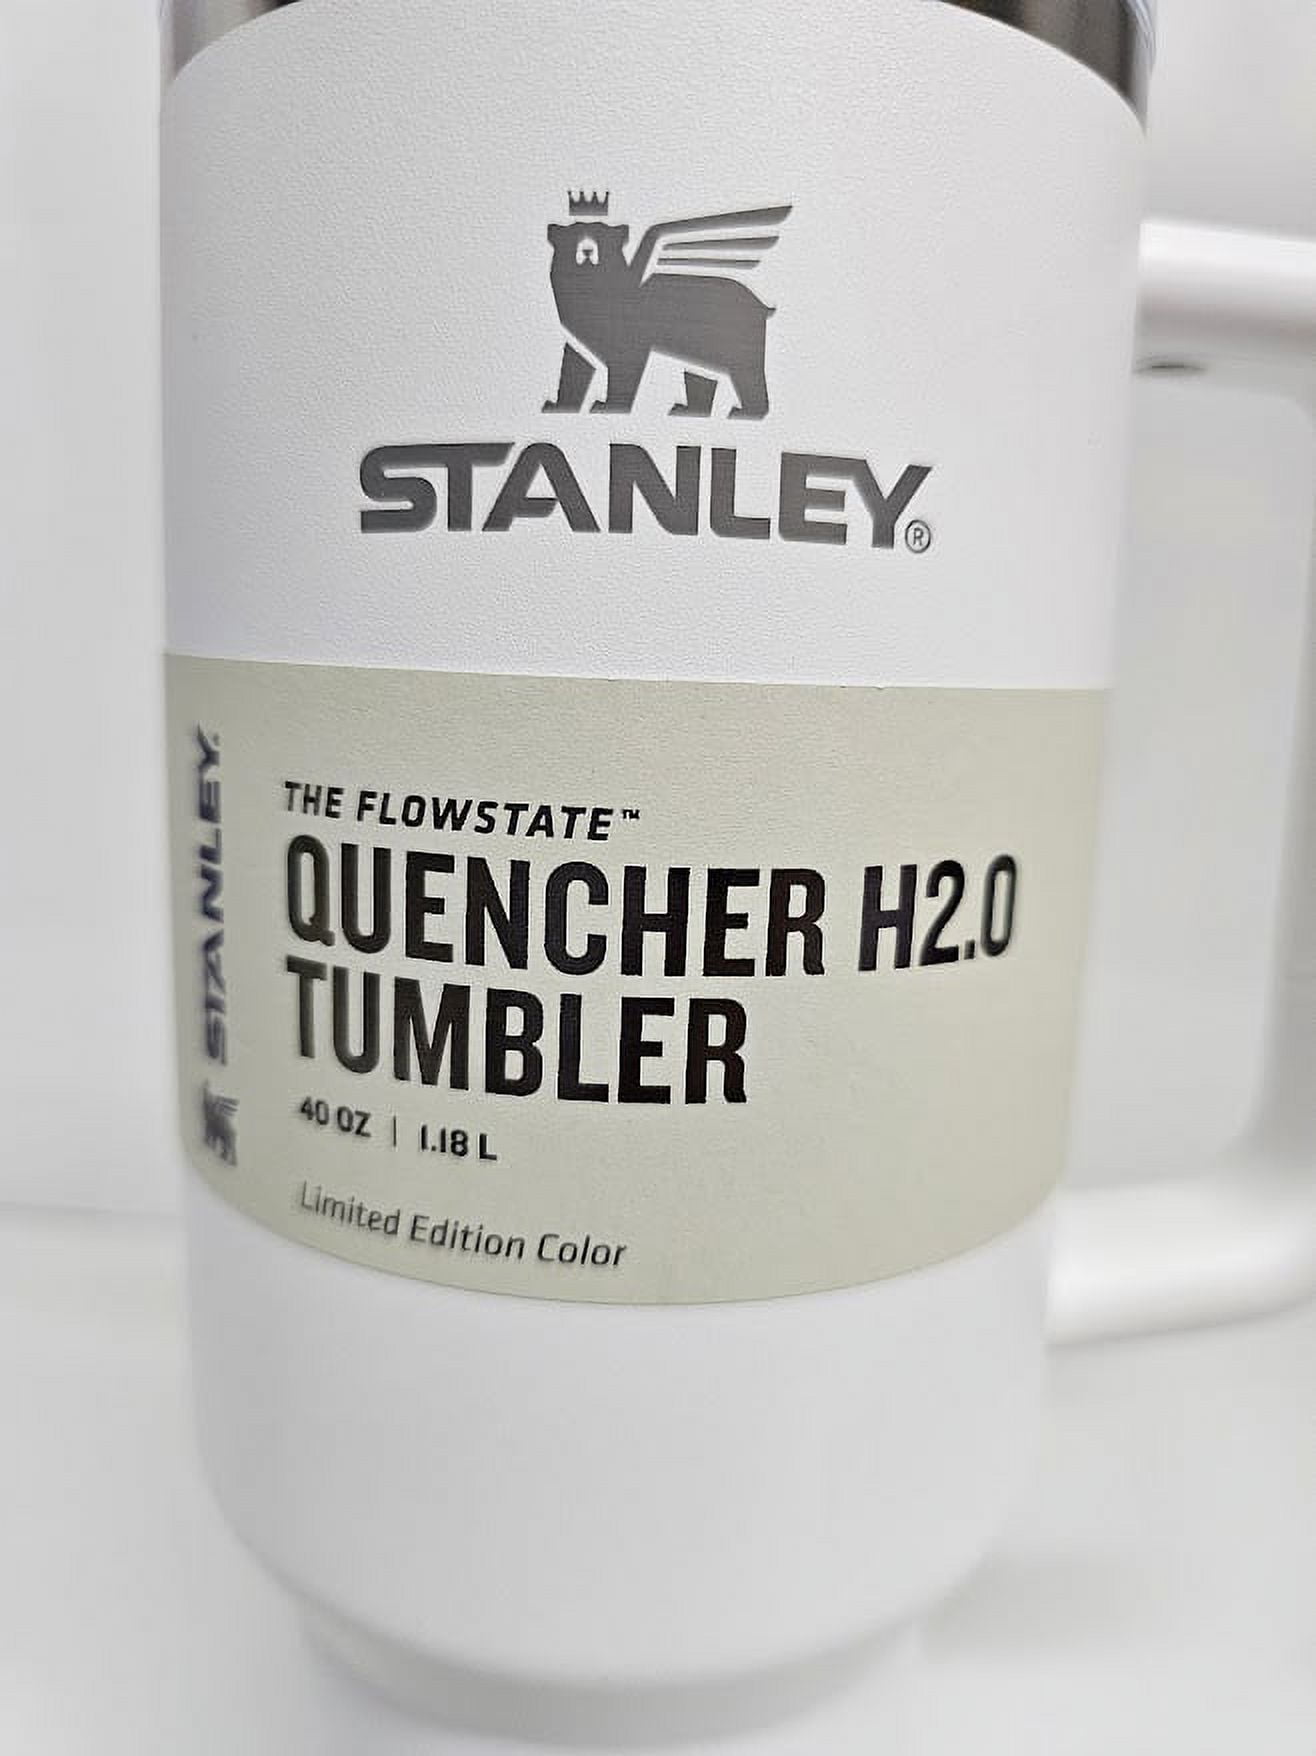 ✨ PEACH Pink Stanley 40 oz FlowState Quencher H2.0 Tumbler Limited Edition